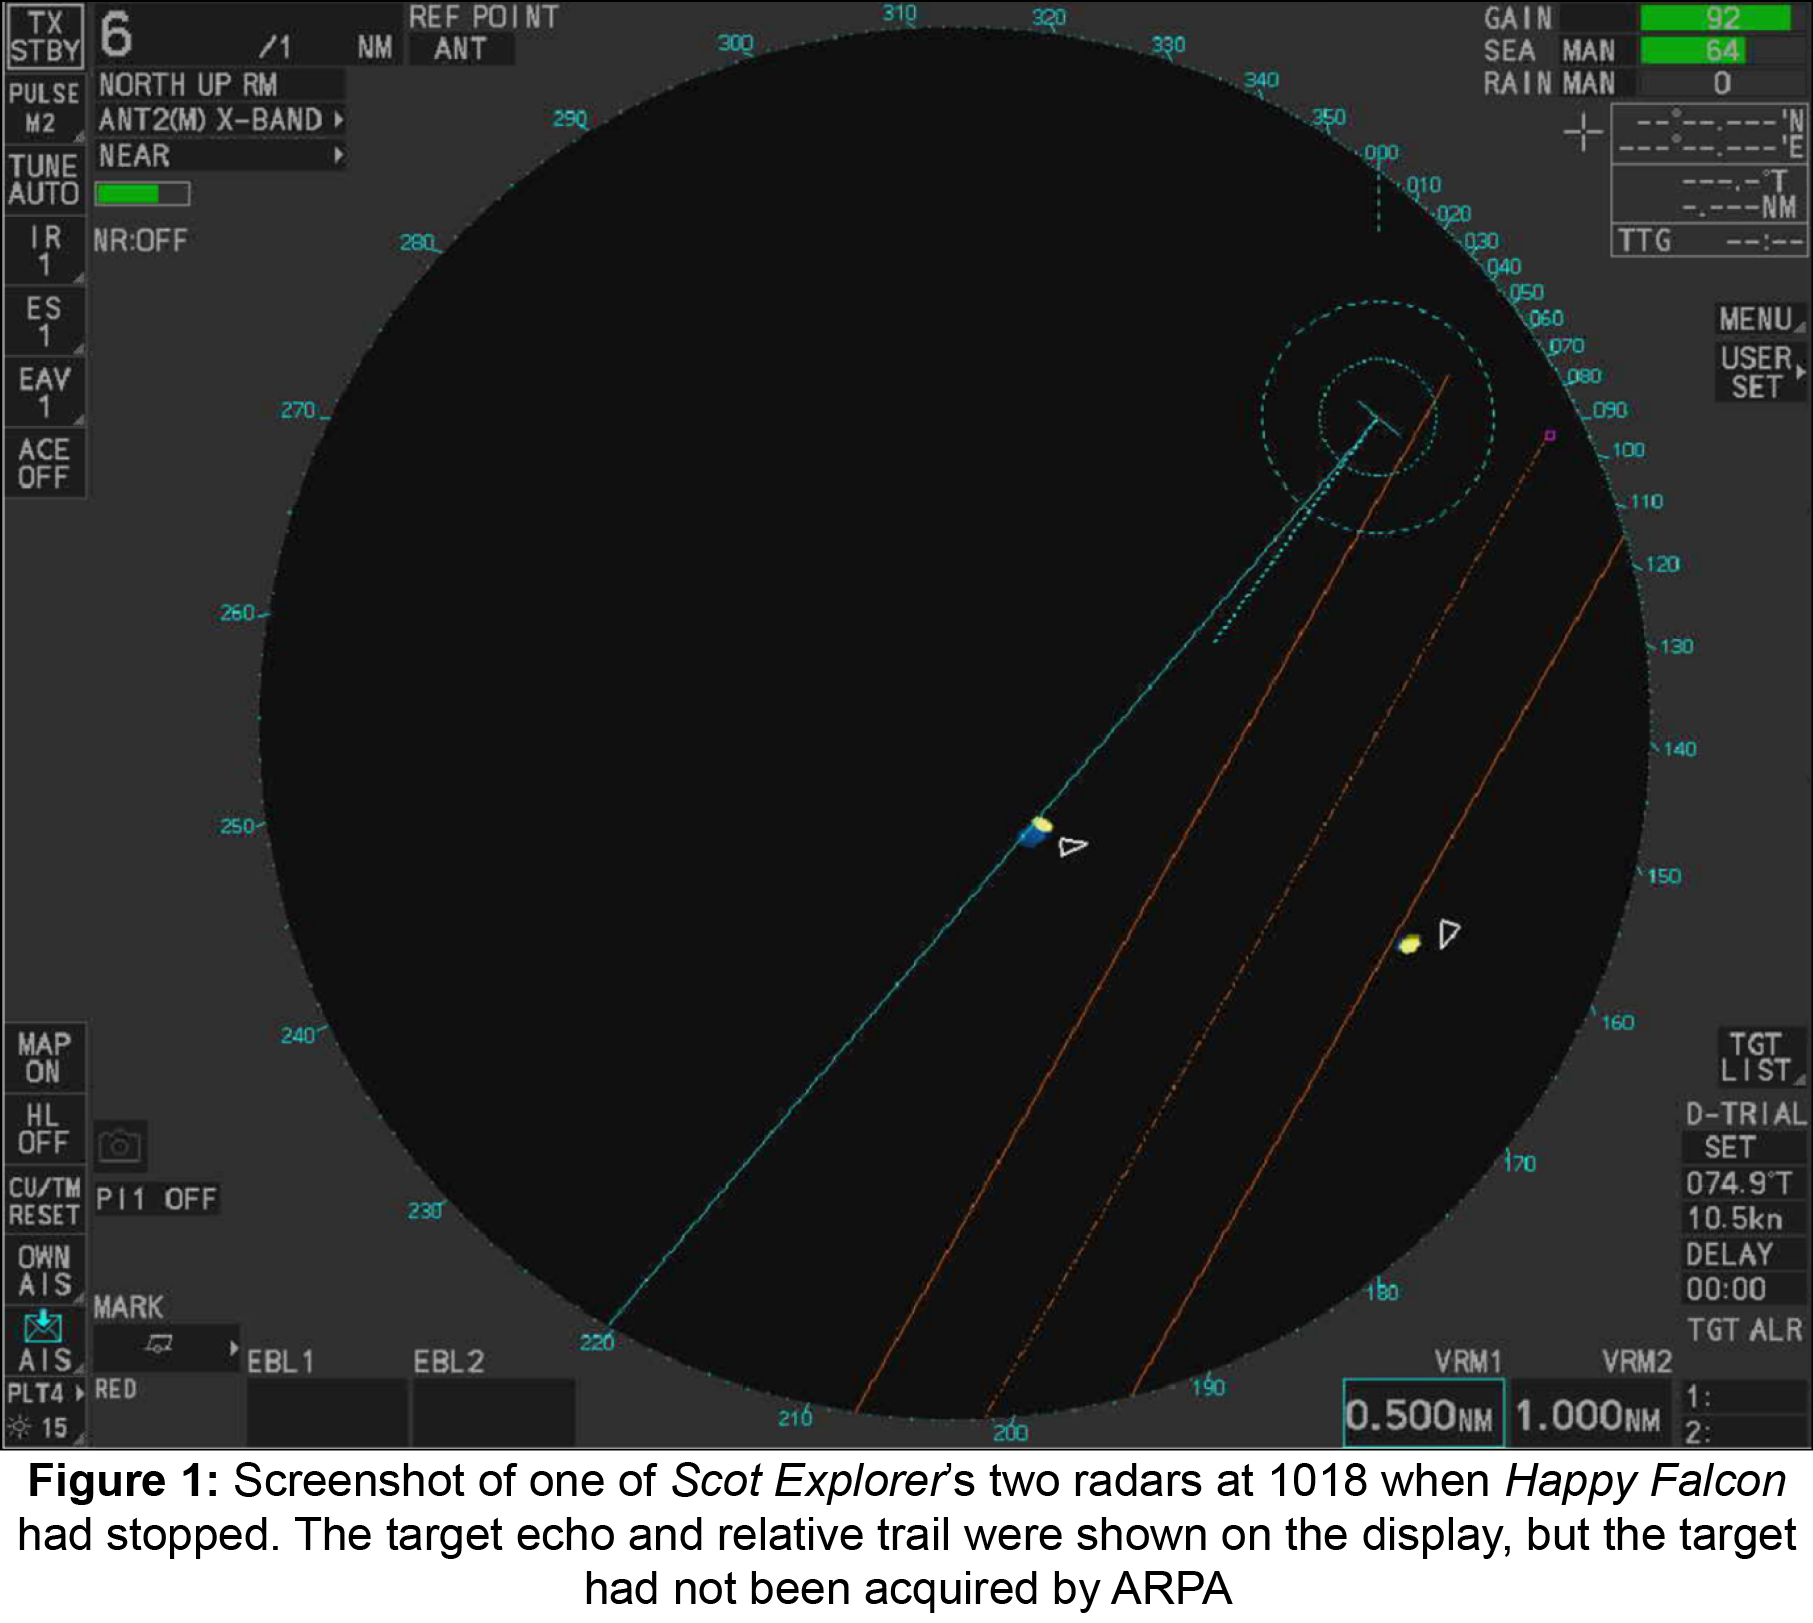 Scot Explorer Figure 1 - Screenshot of one of Scot Explorers two radars at 1018 when Happy Falcon had stopped -The target echo and relative trail were shown on the display, but the target had not been acquired by ARPA